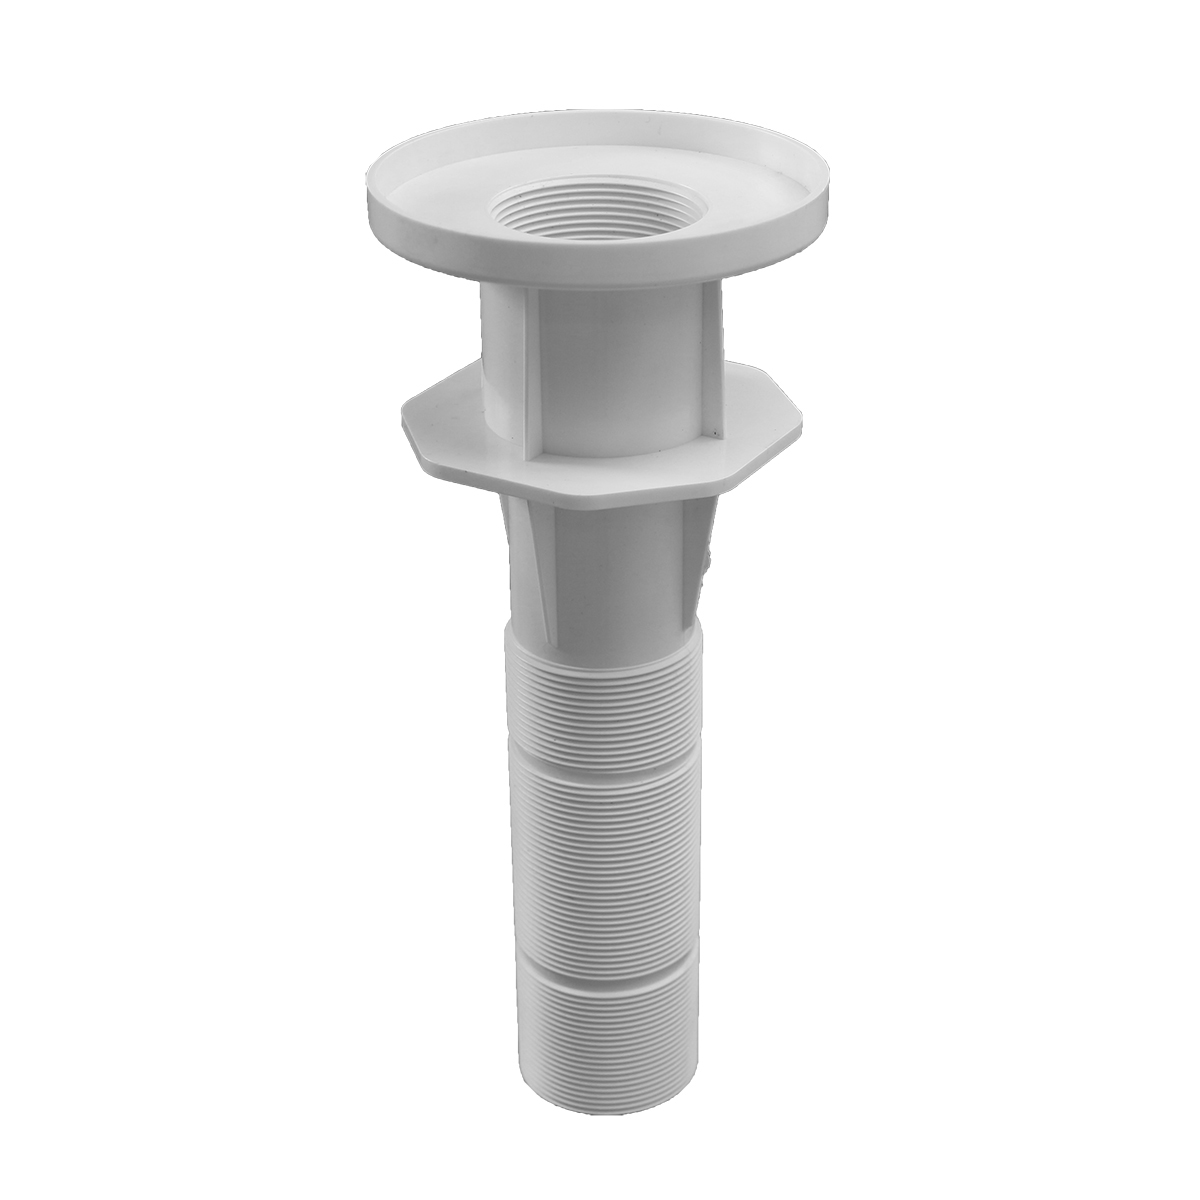 Smart wall conduit for polyester and liner pools ABS white, d50 mm solvent internal, imperial 1,5" internal Smart wall conduit for polyester and liner pools ABS white, d50 mm solvent internal, imperial 1,5" internal